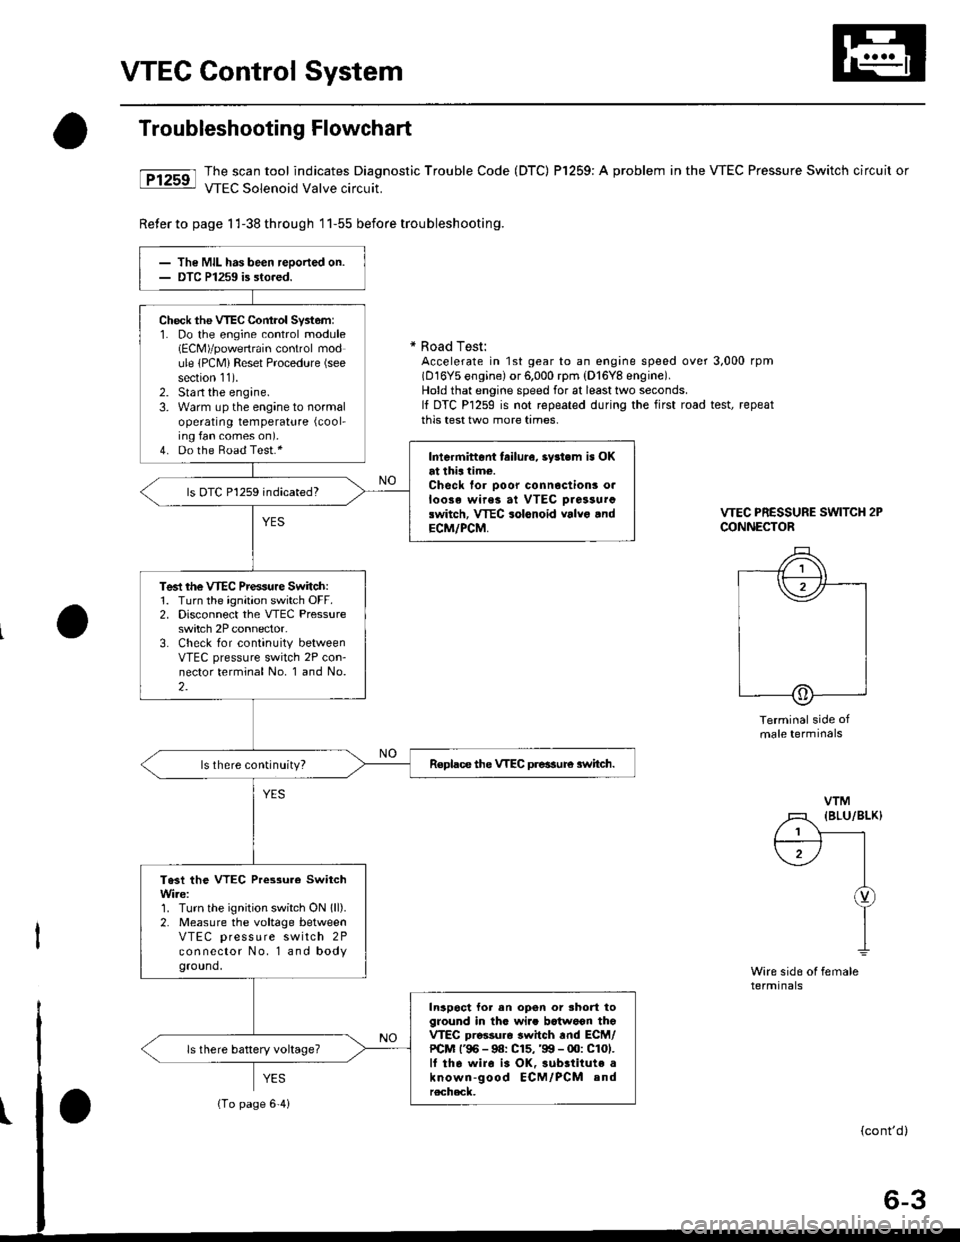 HONDA CIVIC 1998 6.G Workshop Manual VTEC Control System
Troubleshooting Flowchart
tFtrsrl #ilH:::lj1t:"J:T,?ffnostic 
rrouble code (Drc) Pr25e: A probrem in the vrEc Pressure switch circuit or
Reter to page 1 l-38 th roug h 1 1-55 befor